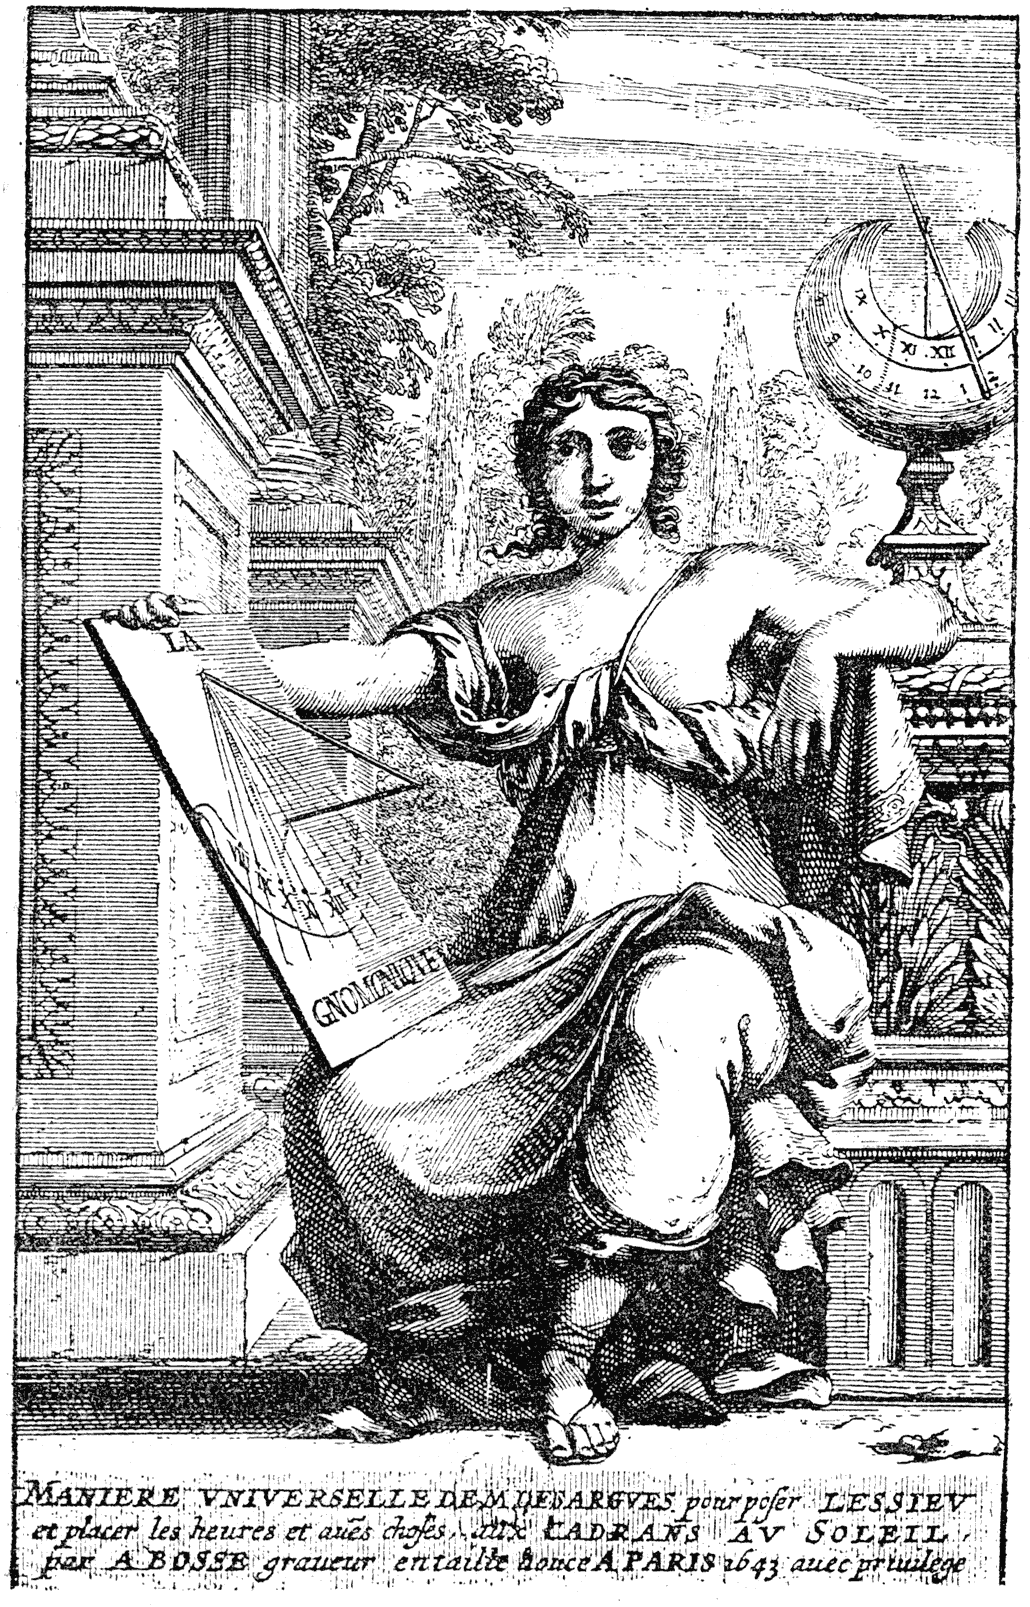 Title of the 'Maniere Universelle' by Desargues, 1643, Abraham Bosse etching.  From Henri Bouchot 'The Printed Book' 1887, page 169, published size 8.3 cm wide by 13.25 cm high.